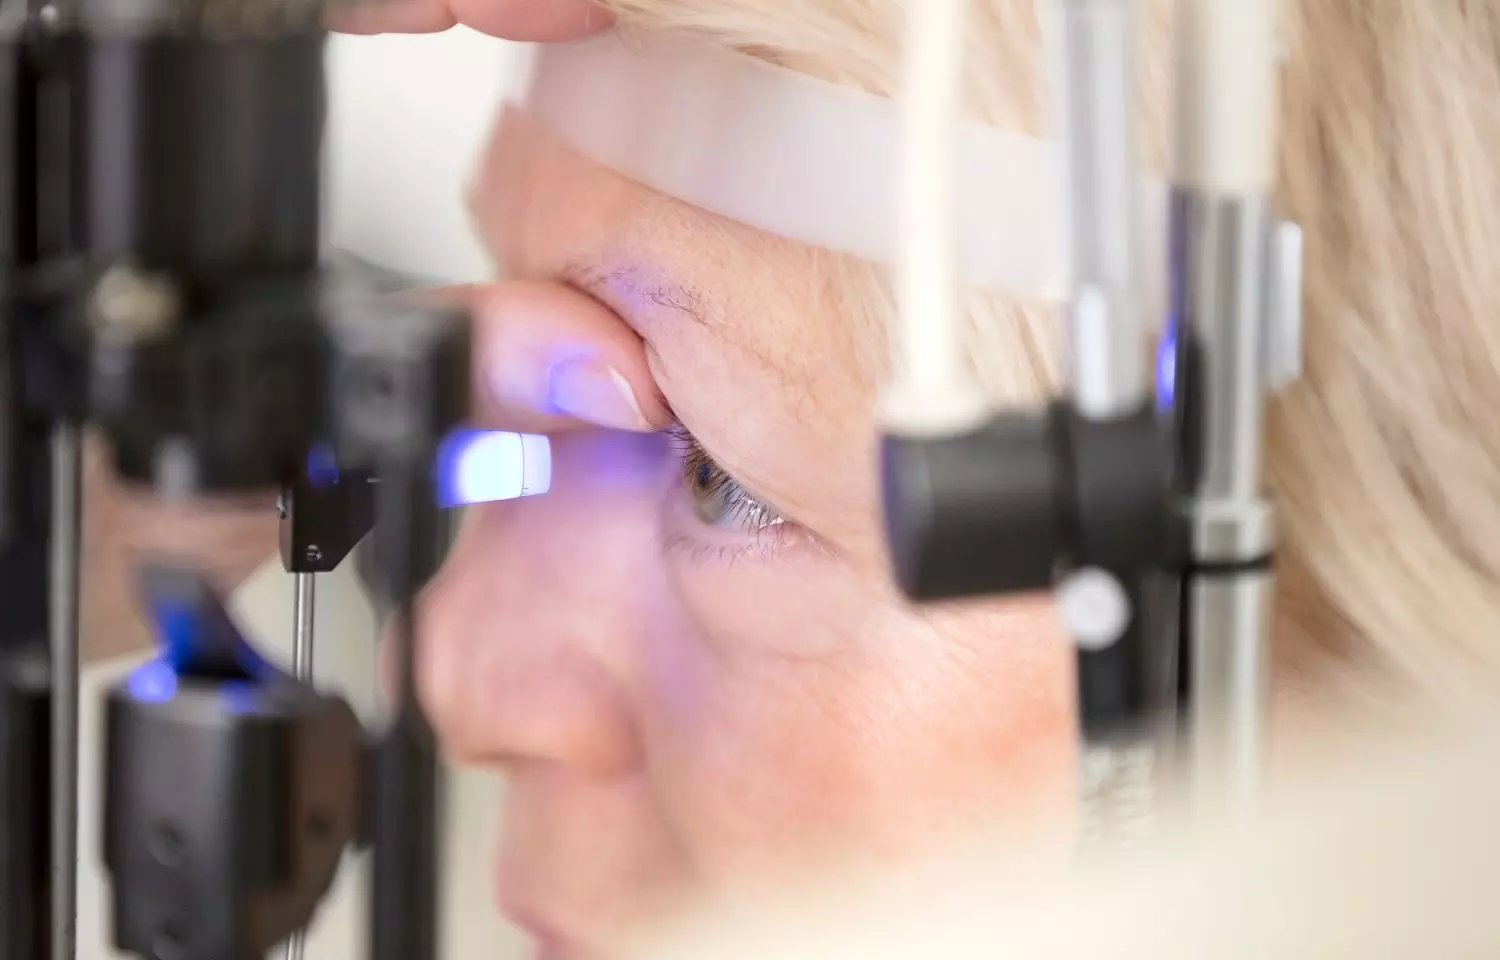 Black patients found six times more likely to have advanced vision loss after glaucoma diagnosis than white patients